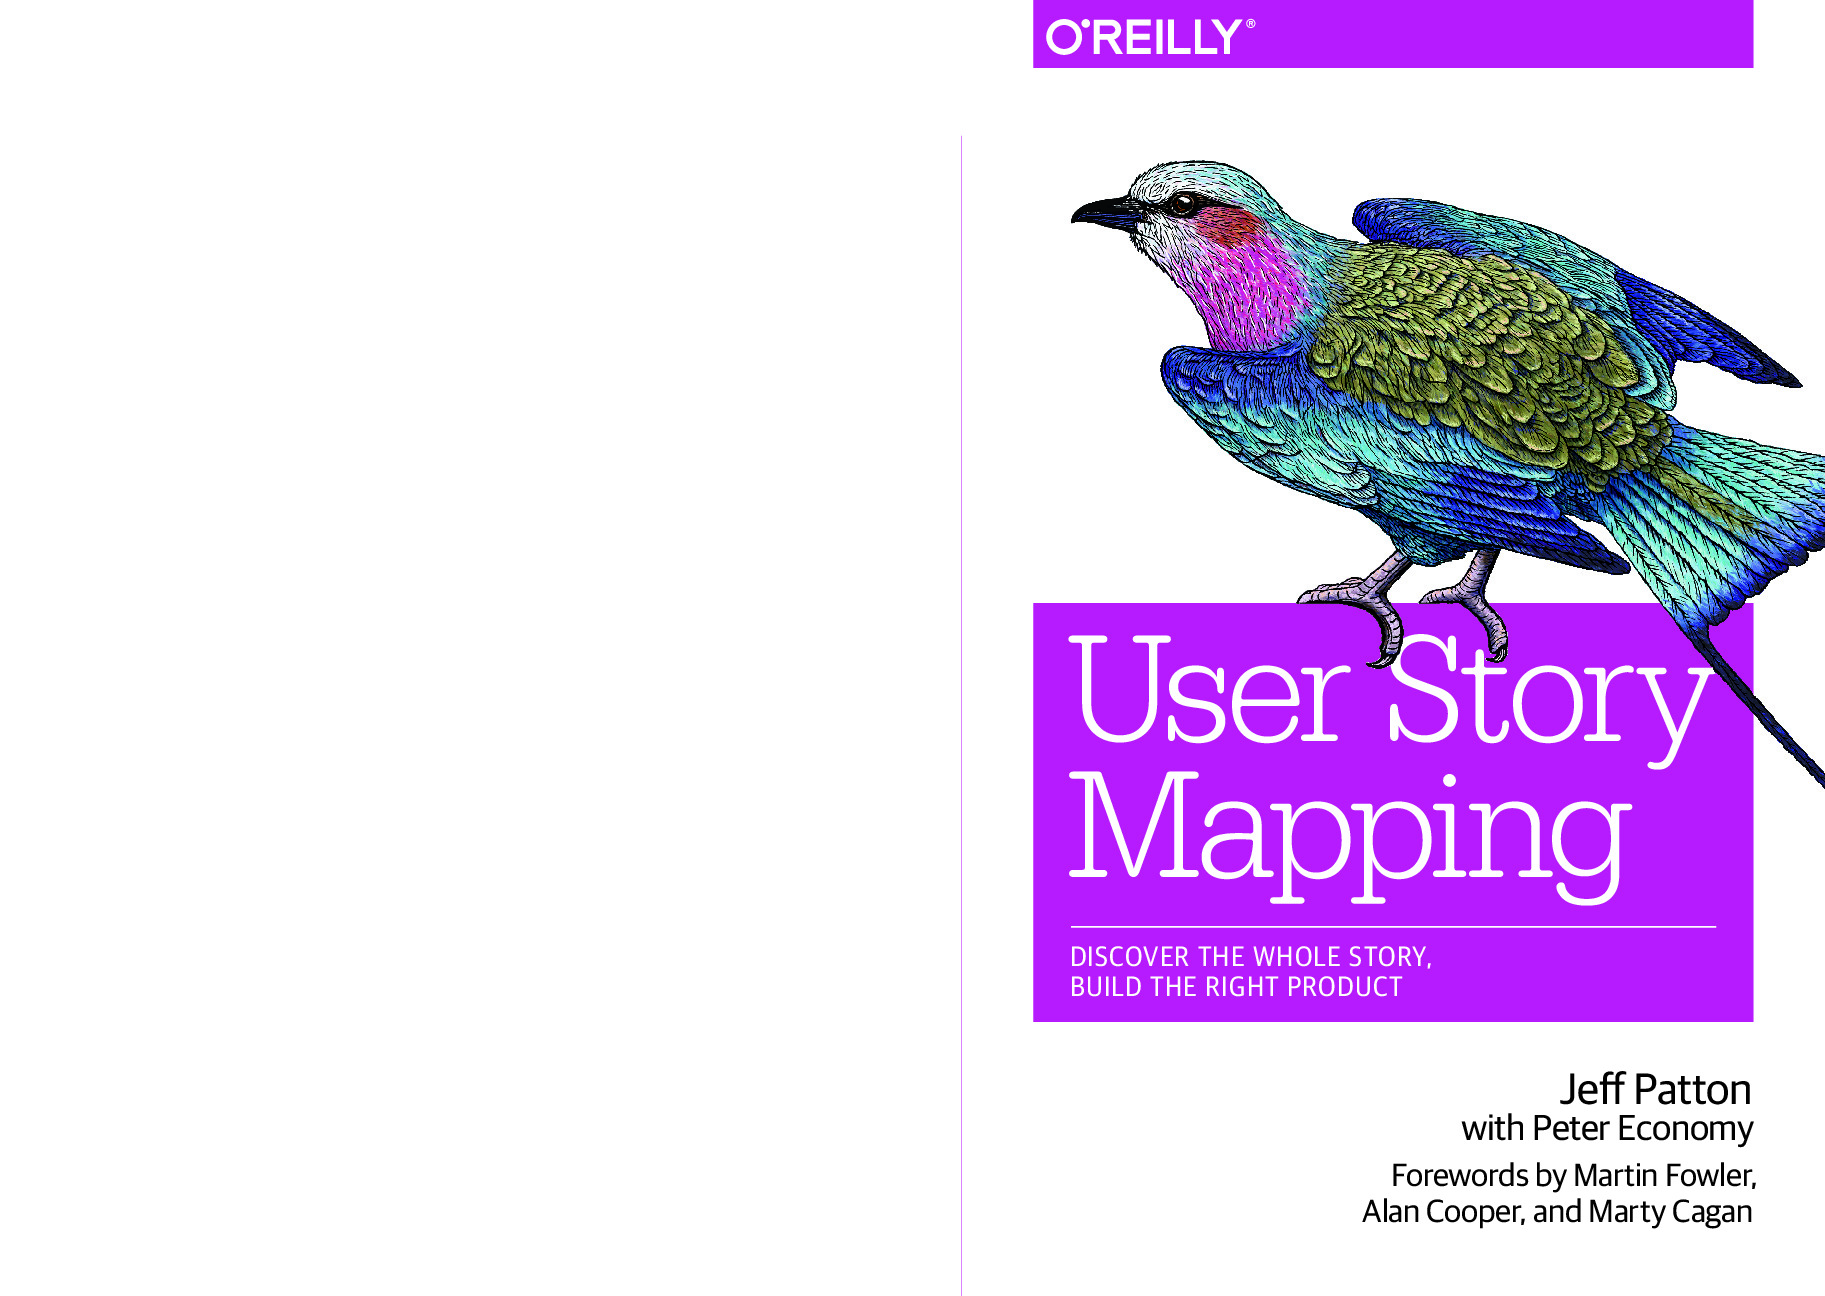 User Story Mapping – Discover the Whole Story, Build the Right Product